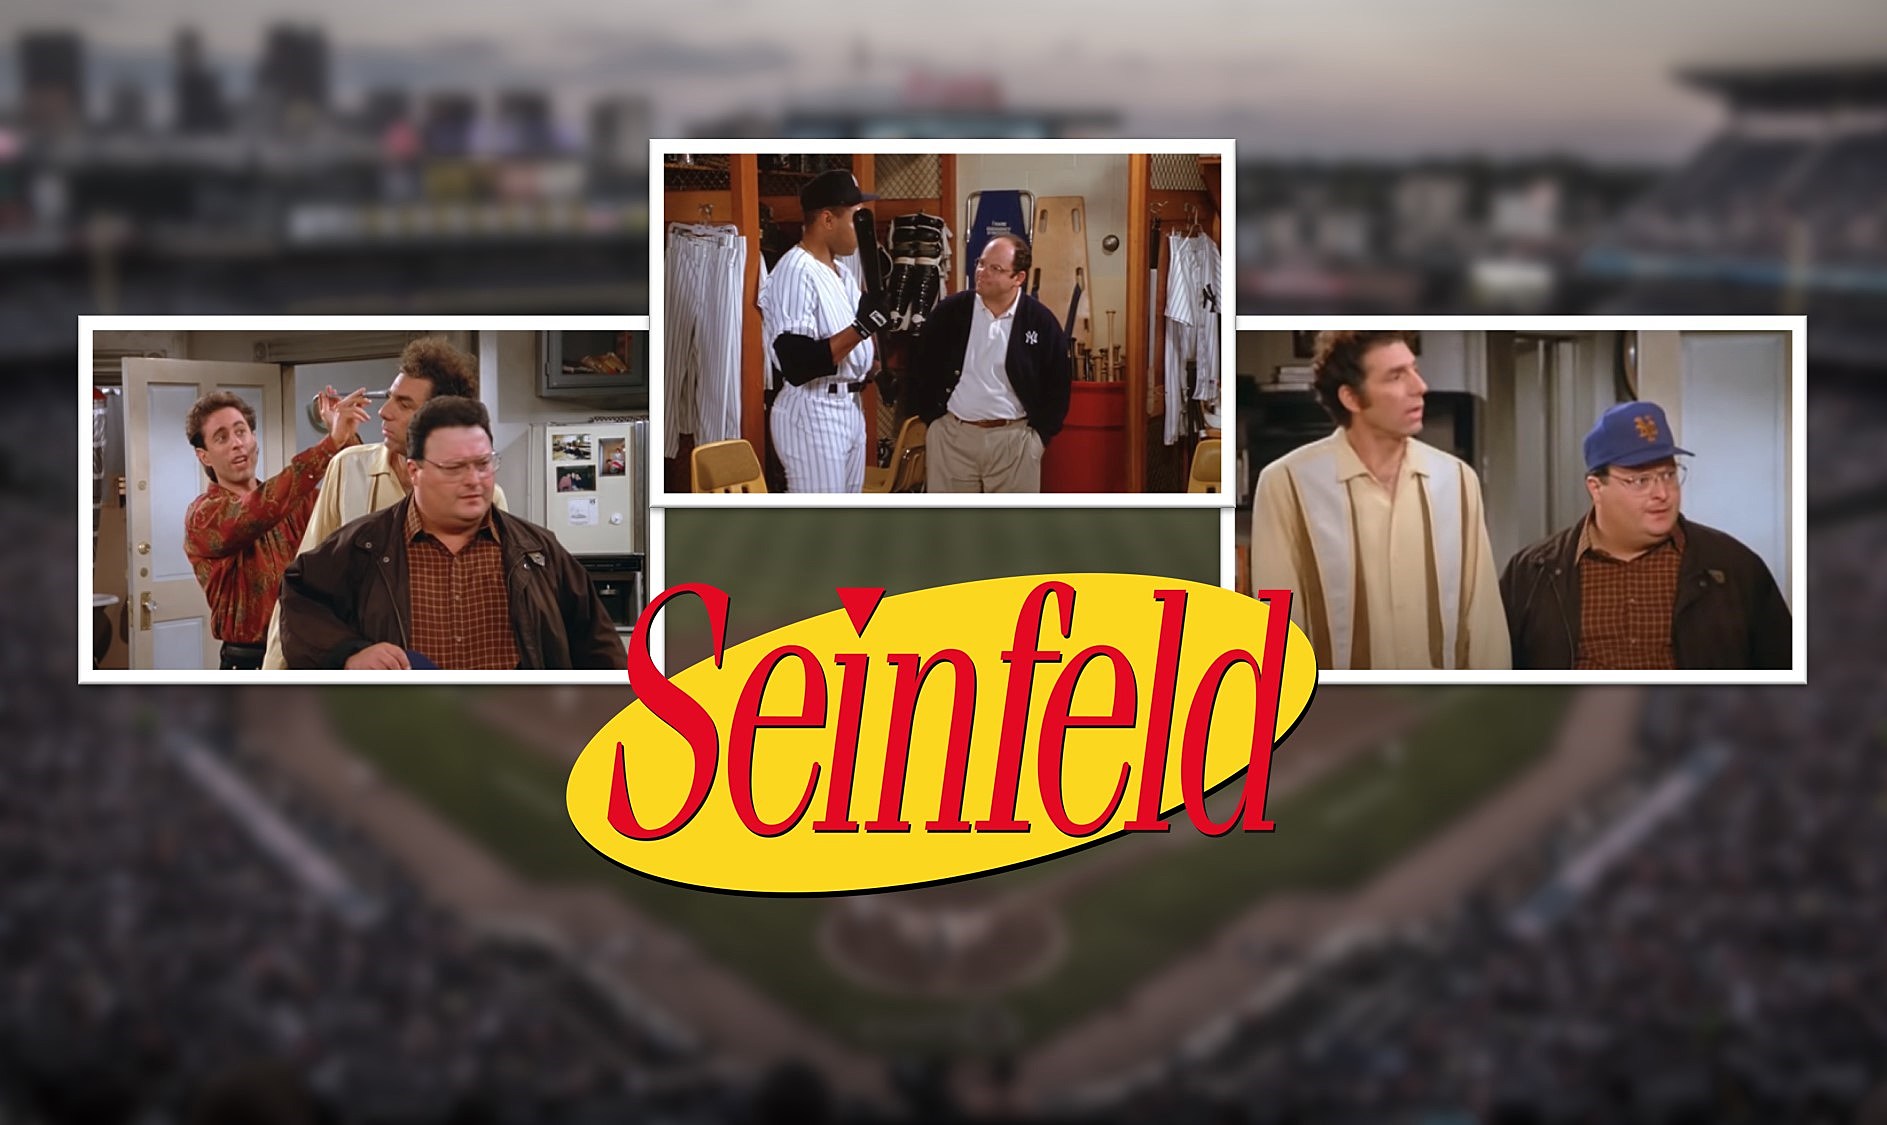 15 Hilarious New York Baseball Moments Featured on 'Seinfeld